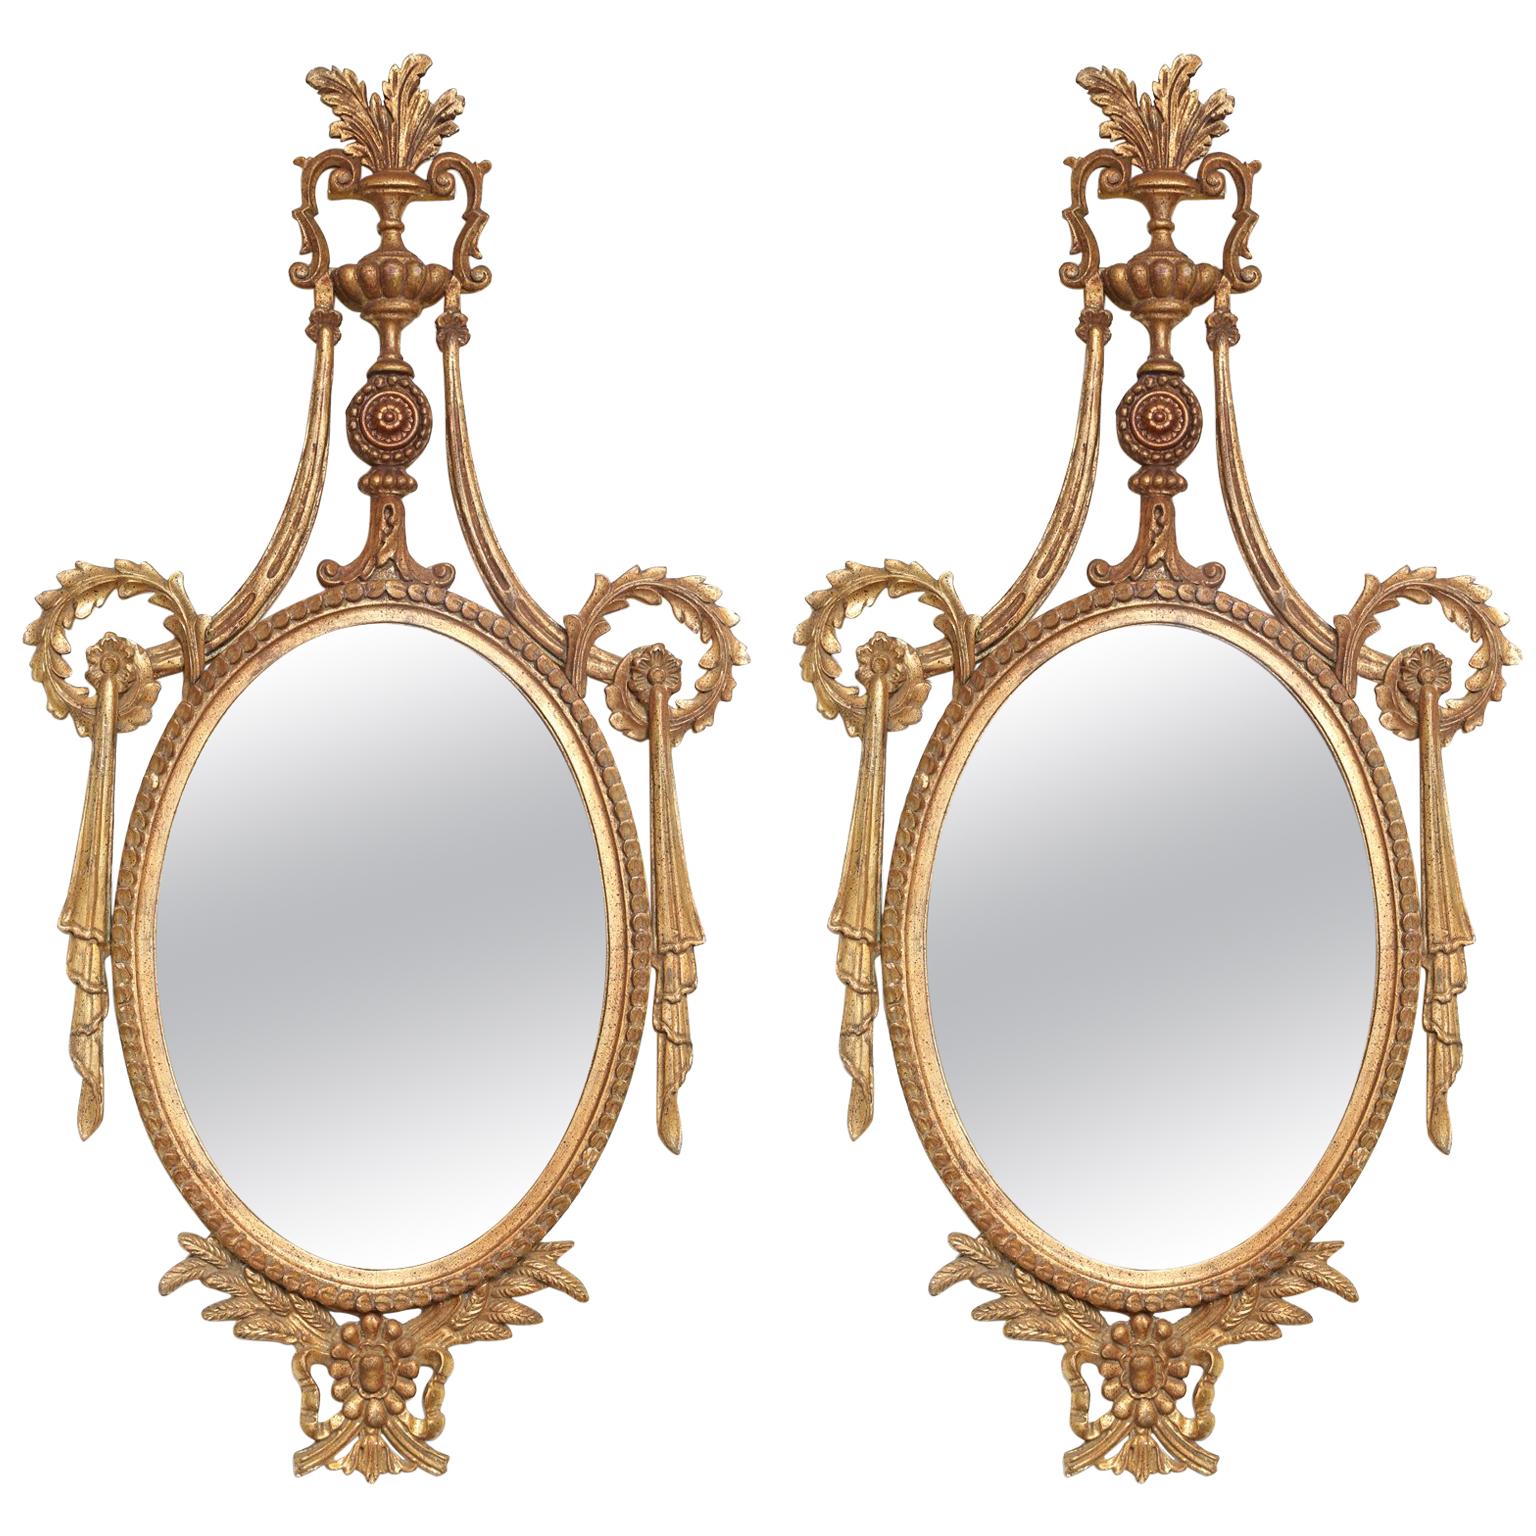 Pair of Classical-form Italian Carved Giltwood Oval Mirrors